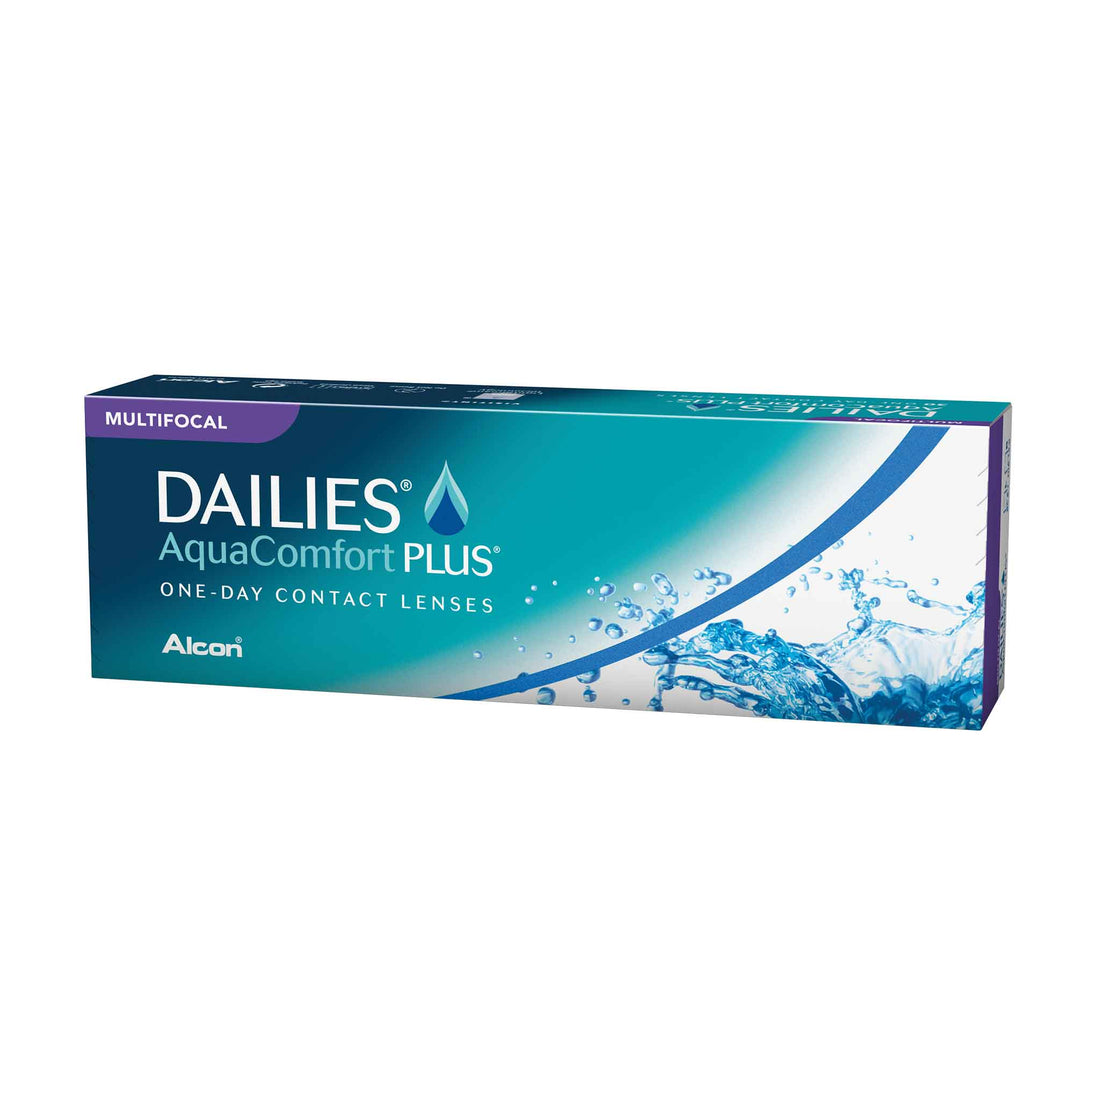 DAILIES® AquaComfort® Plus Multifocal Contact Lenses - 30 pack - Nation's Vision